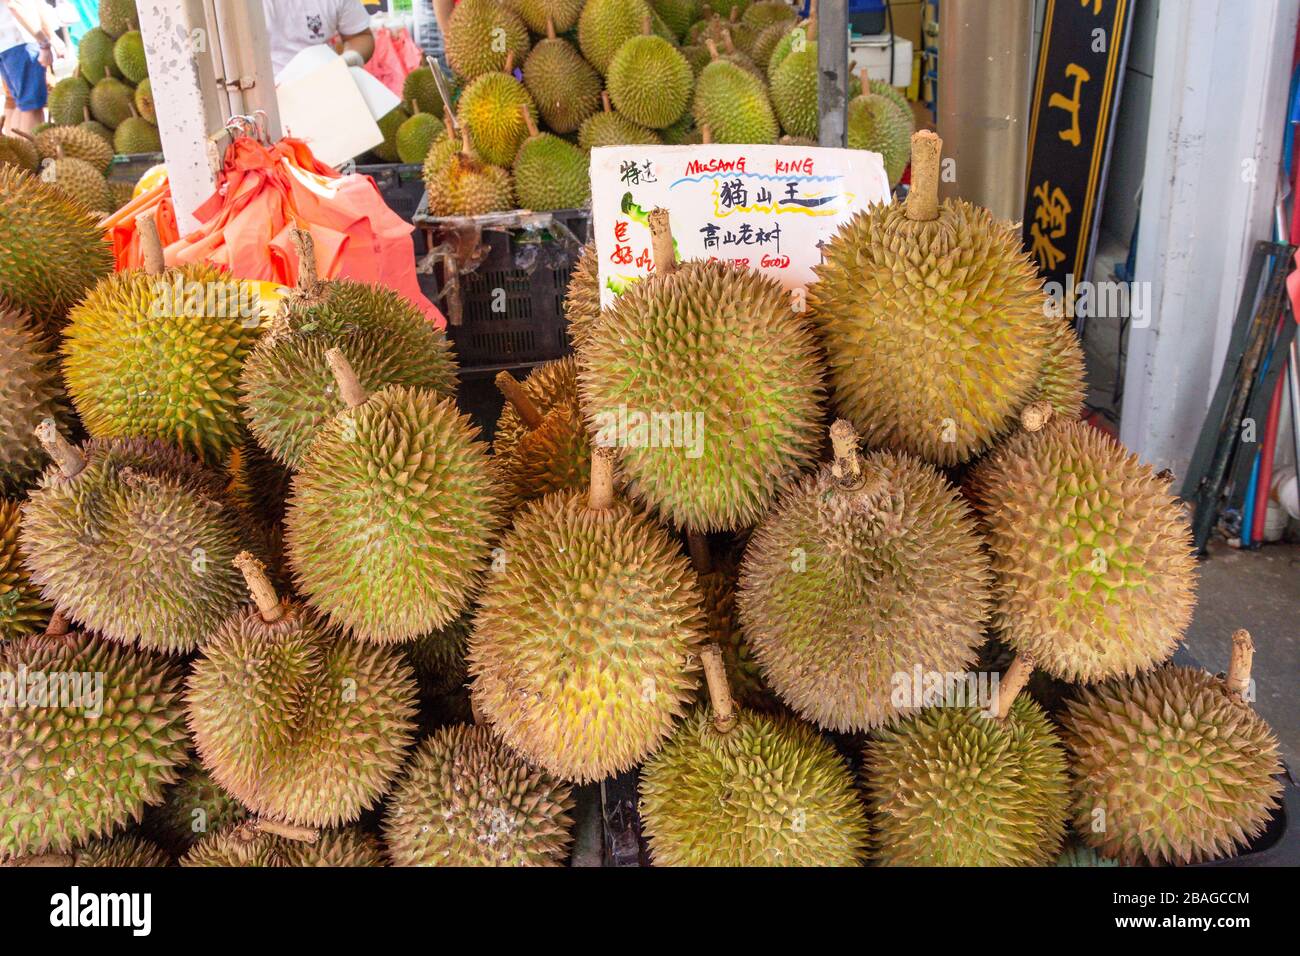 Durian fruit for sale on stall, Temple Street, Chinatown, Central Area, Republic of Singapore Stock Photo